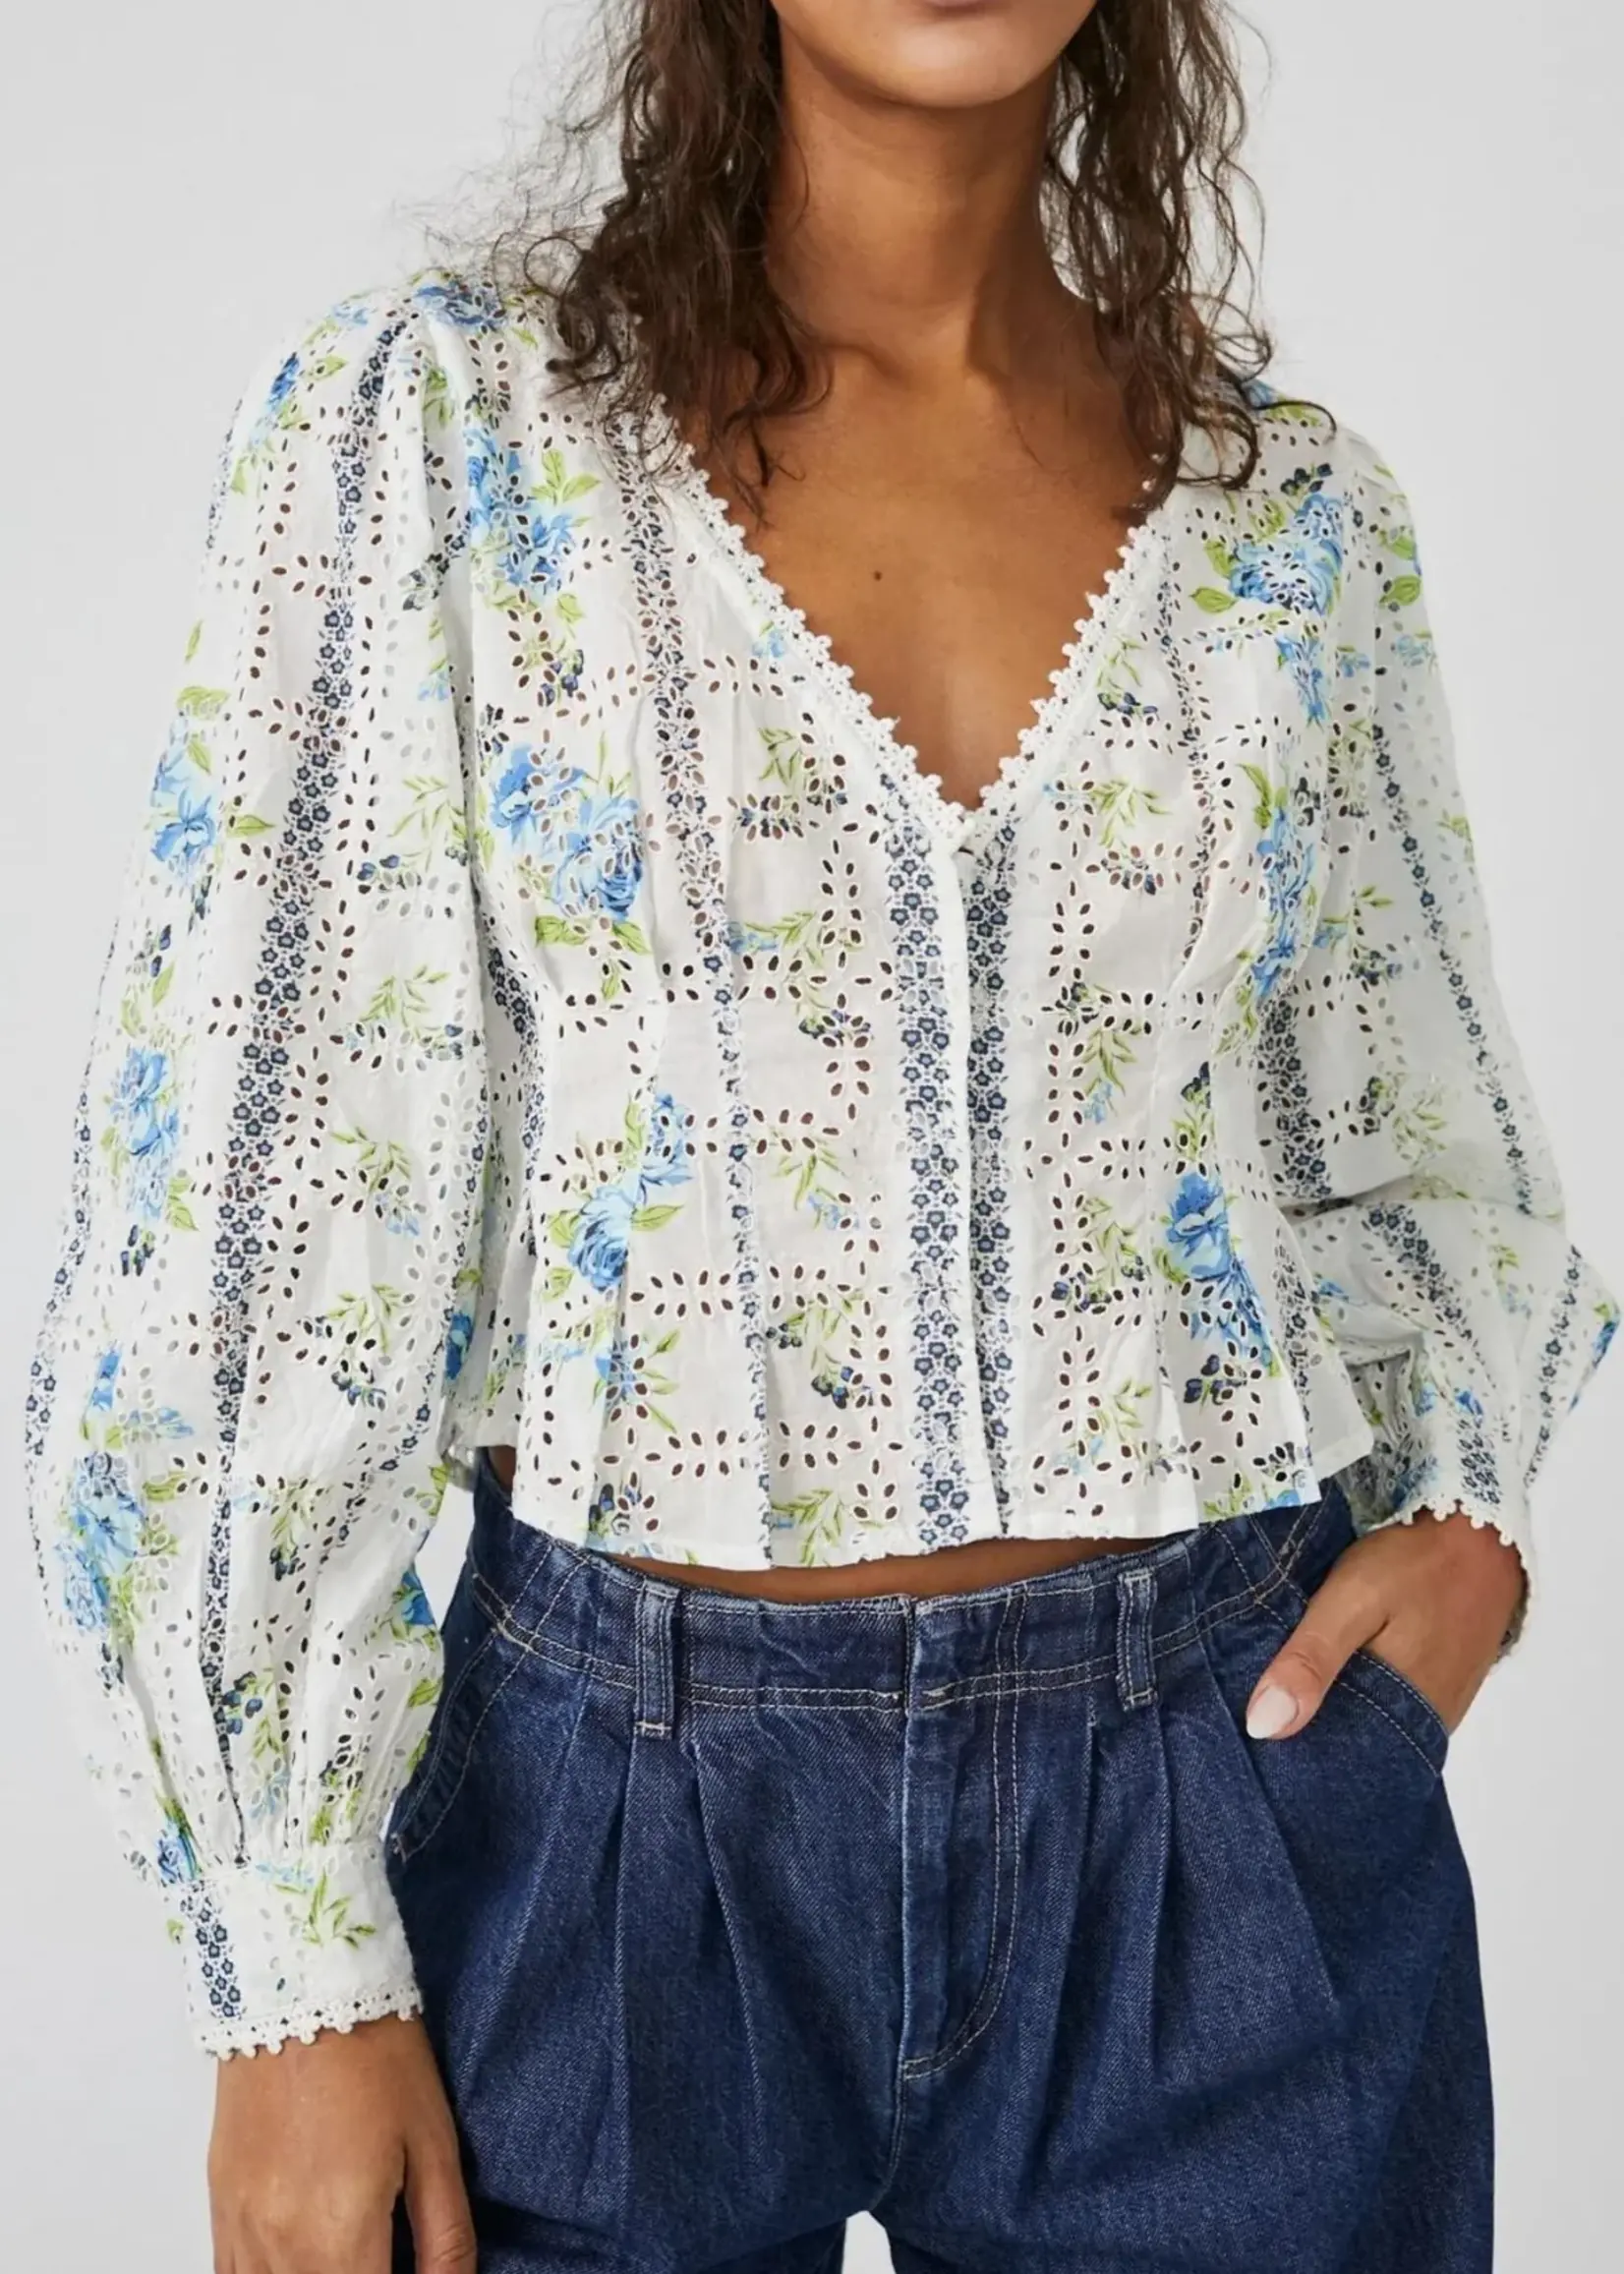 Free People FP Blossom Eyelet Top - Bright White Combo